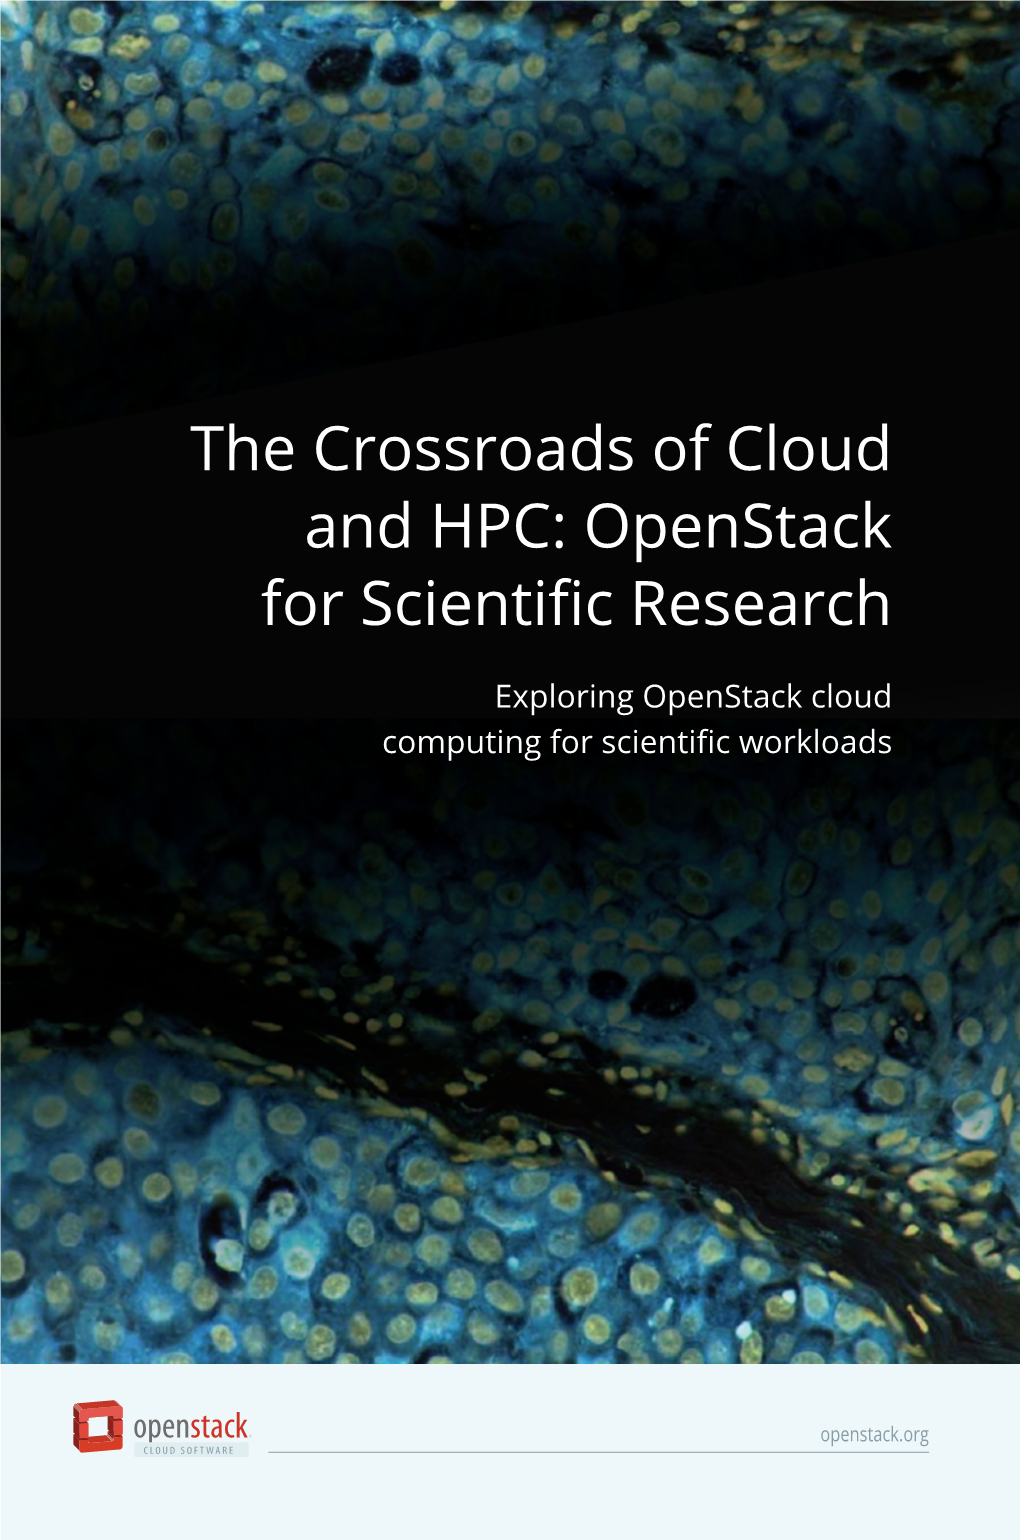 The Crossroads of Cloud and HPC: Openstack for Scientific Research